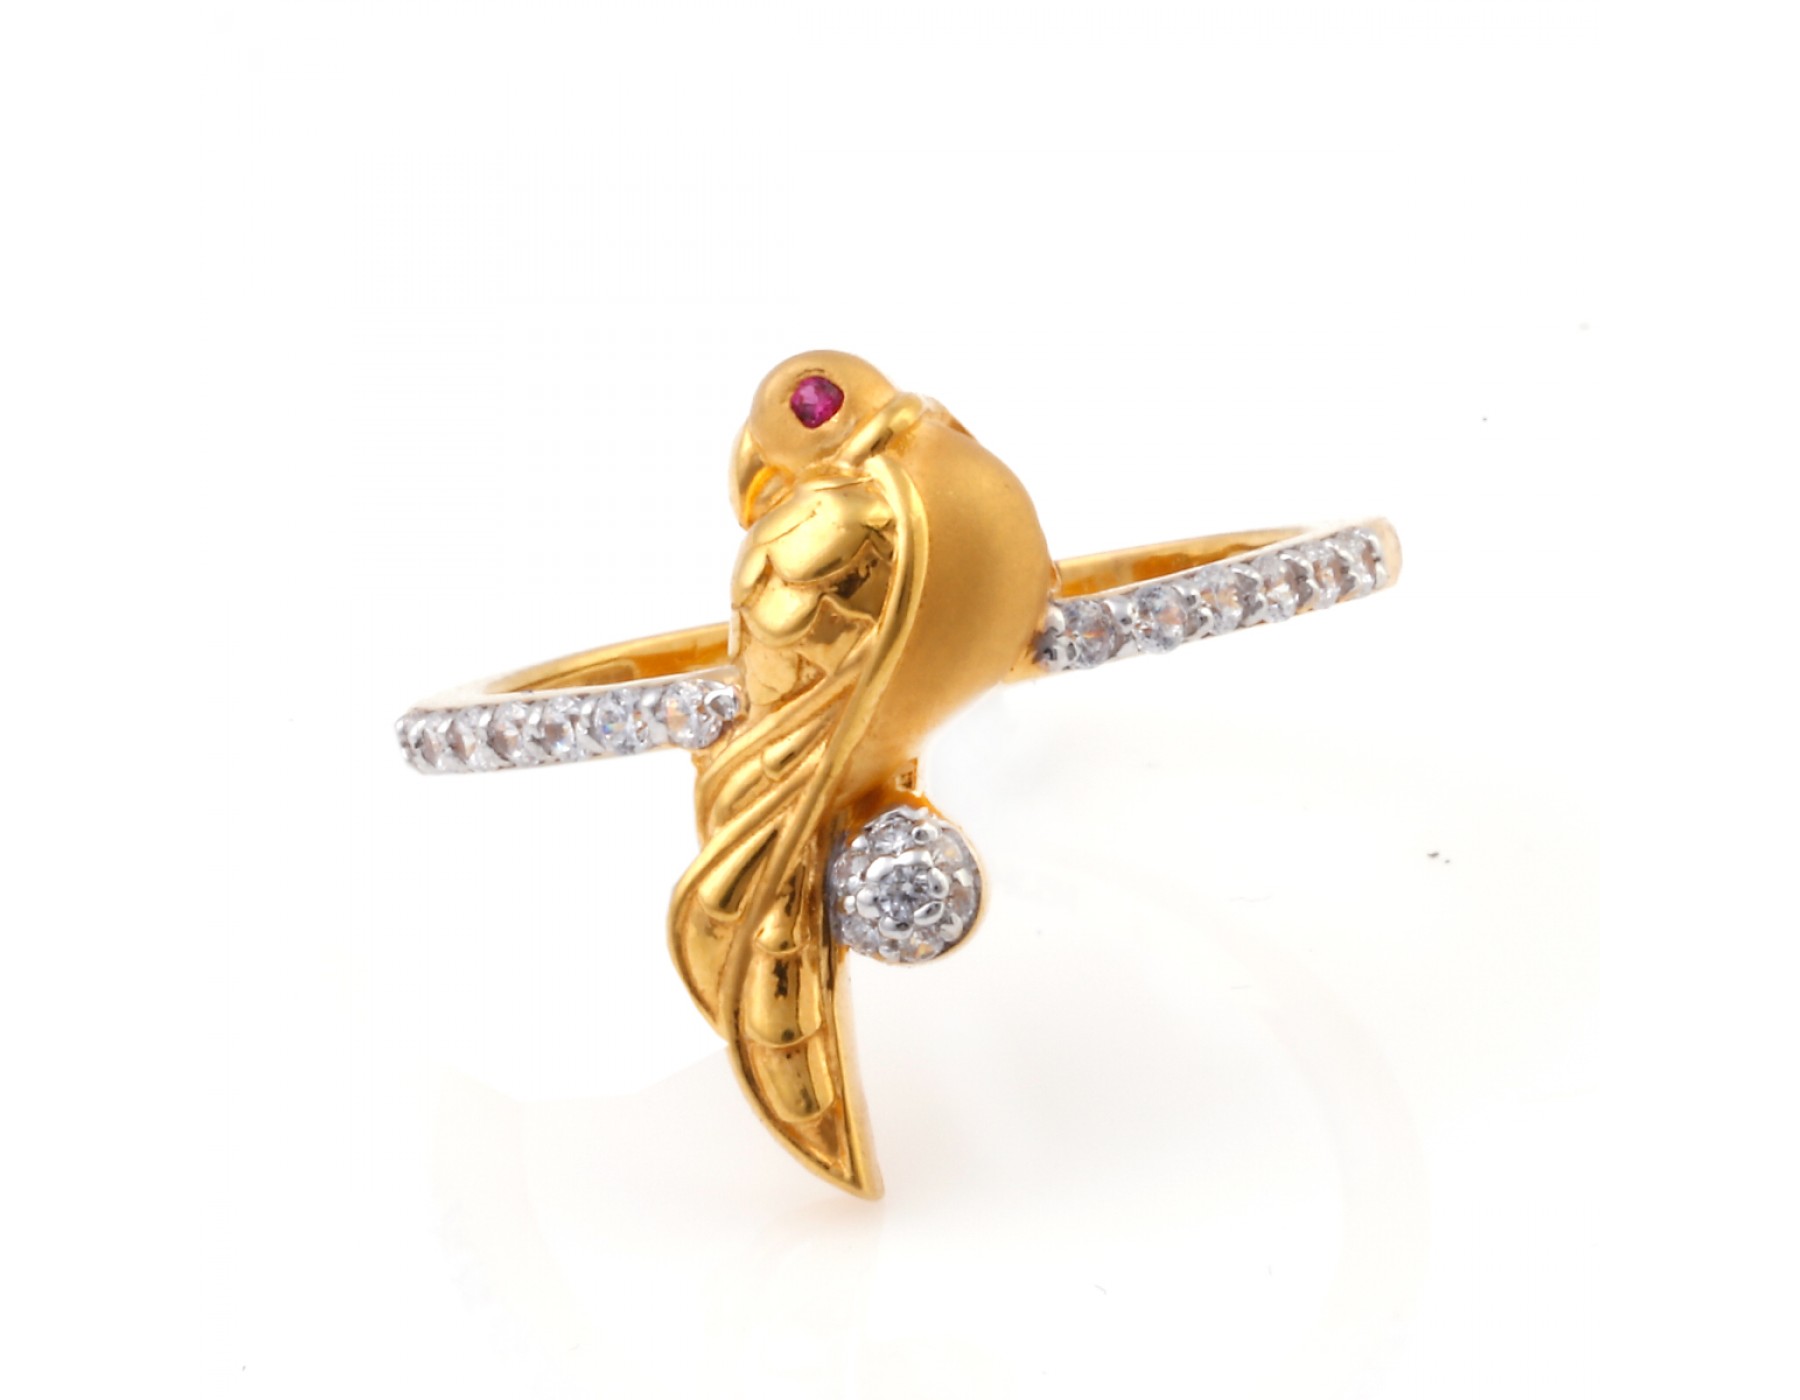 Buy quality Fancy Plain Gold Casting Ladies Ring LRG -0828 in Ahmedabad